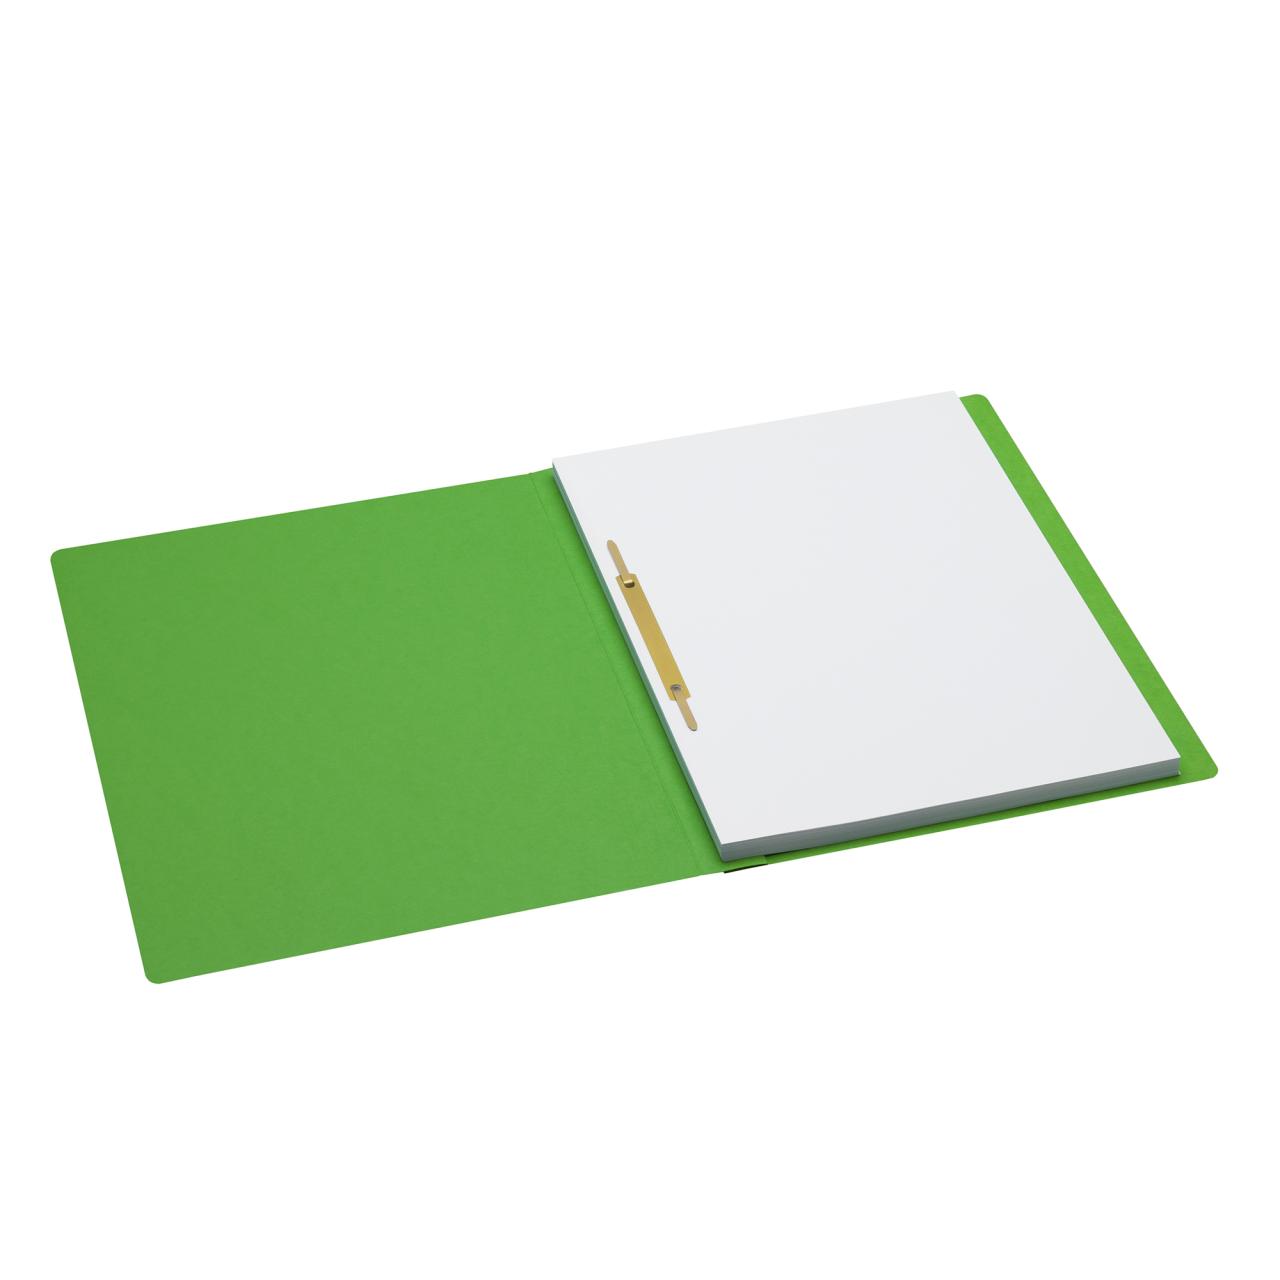 Secolor Folder with Quick Metal Fastener, A4, 100% recycled cardboard, FSC® 